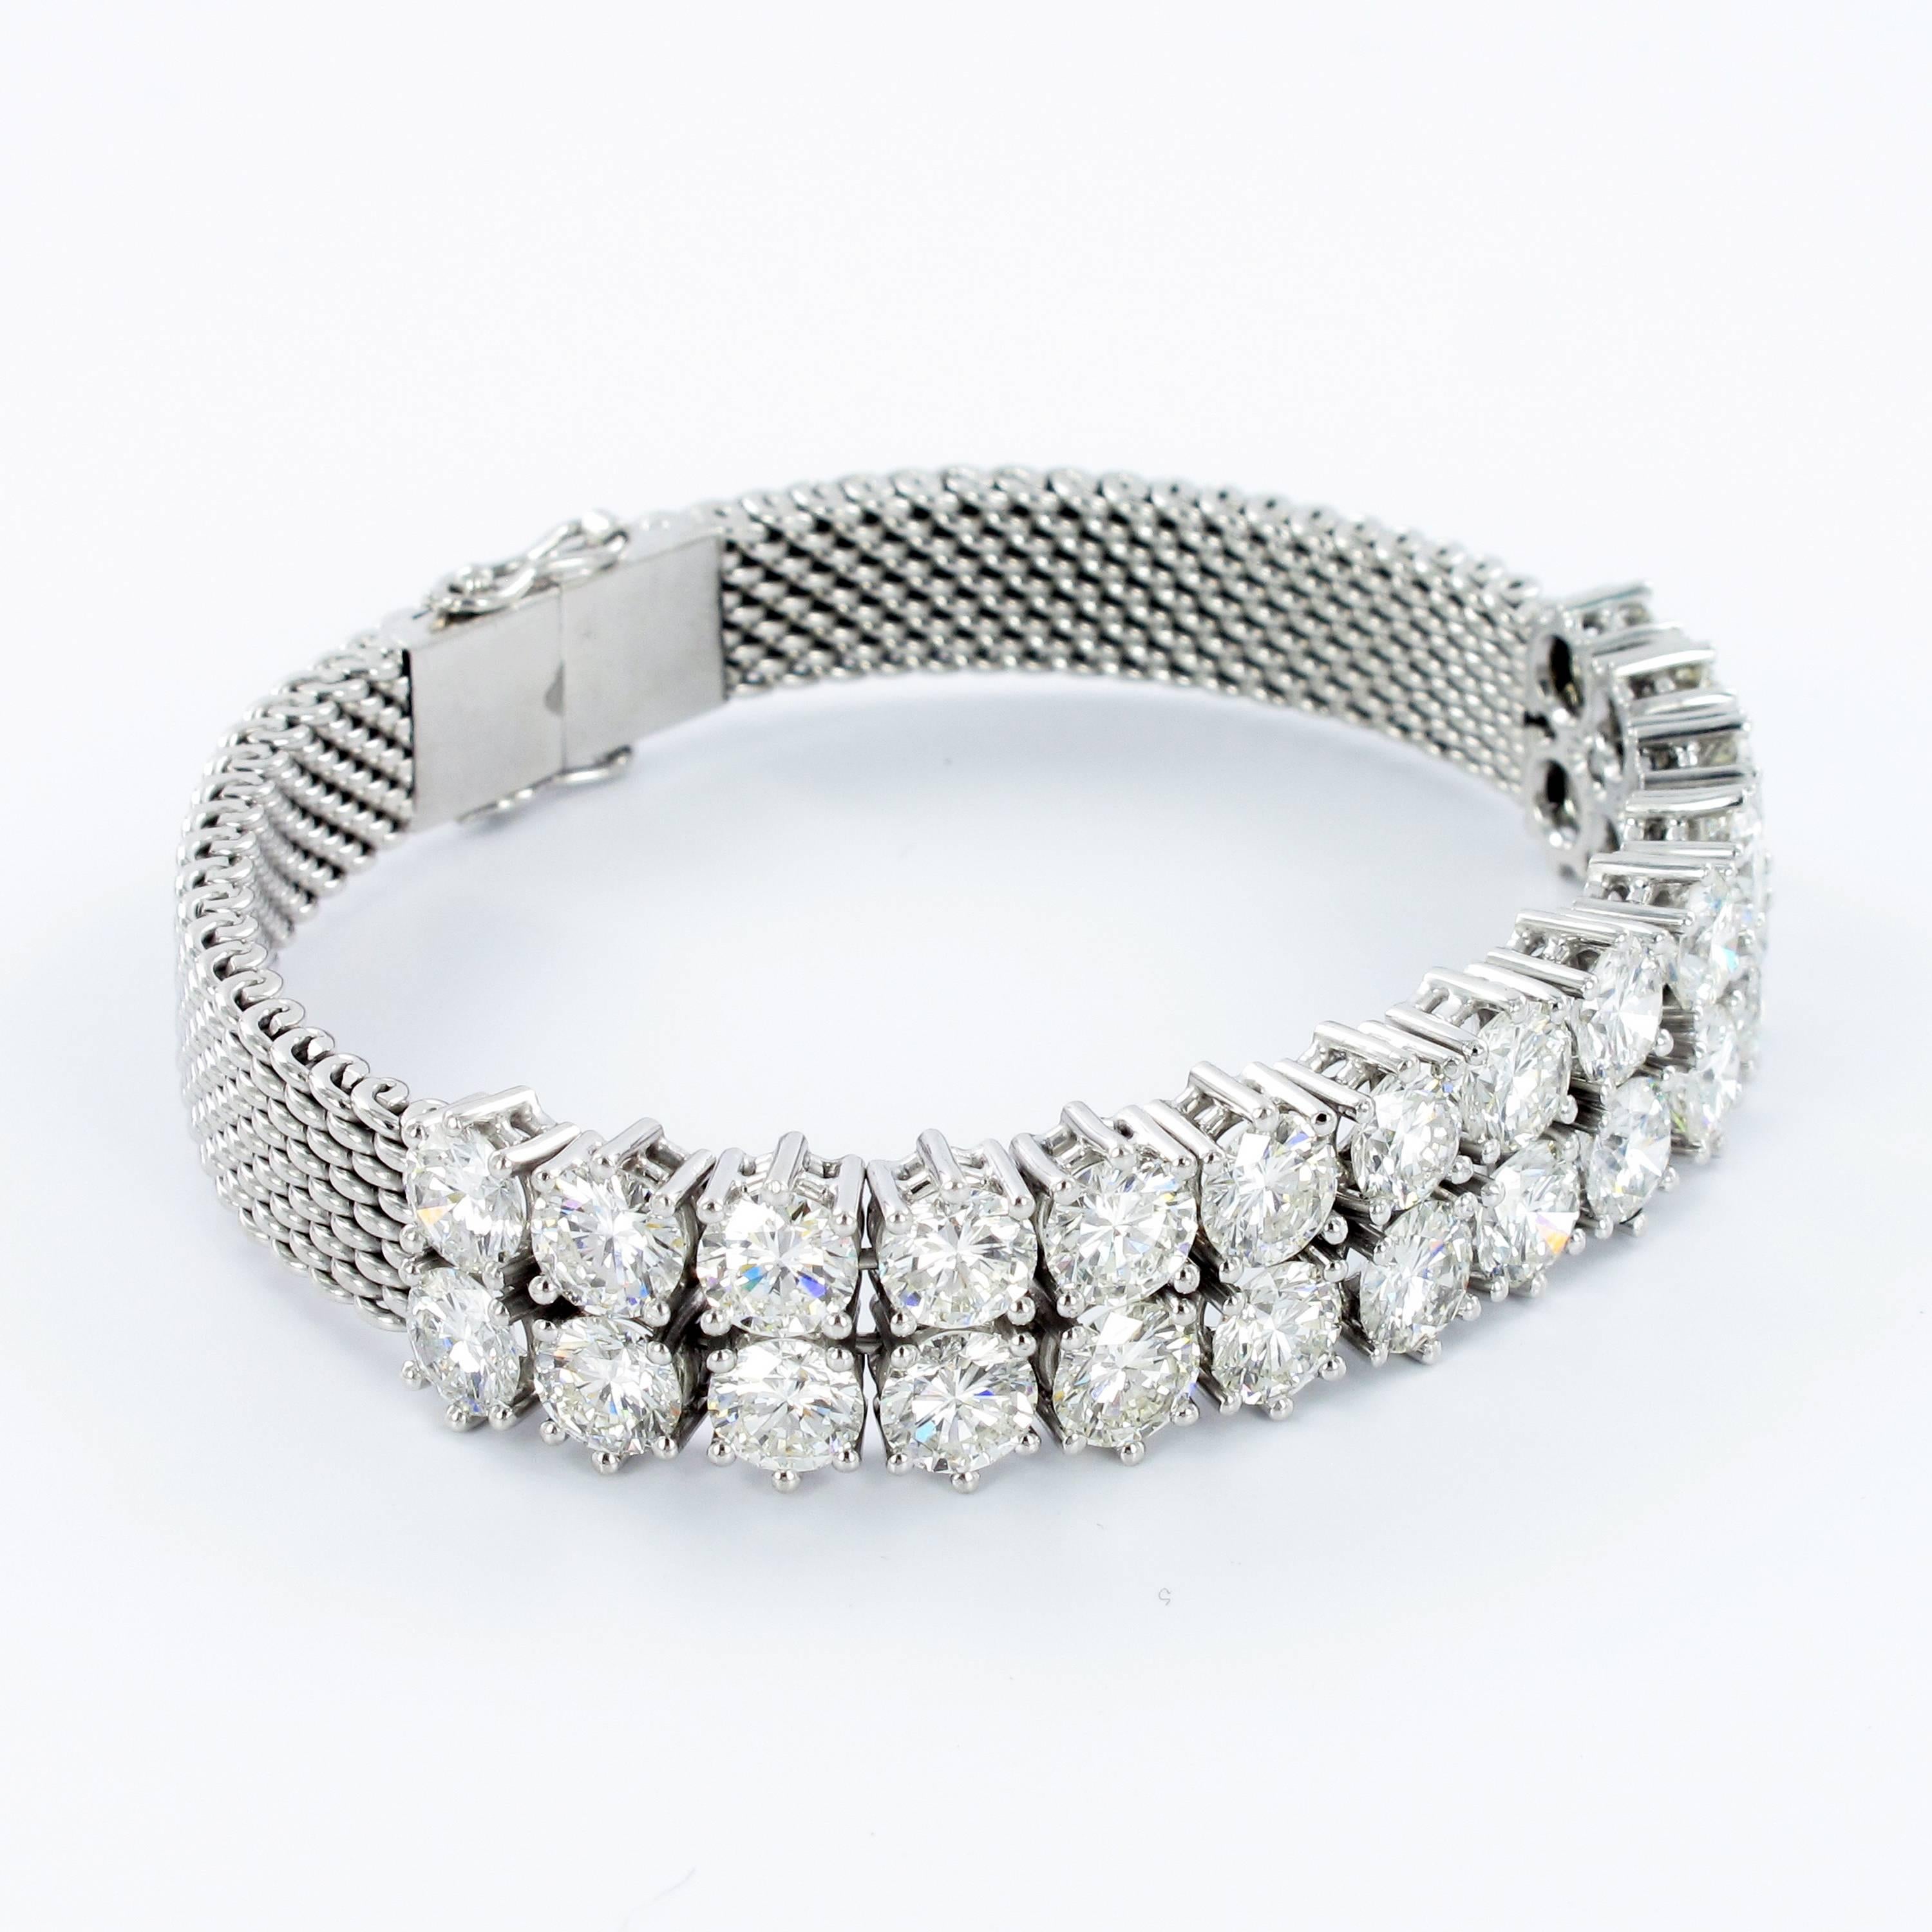 Double row diamond bracelet manufactured in white gold 750. Prong set with 28 brilliant round cut diamonds totaling approximate 12.45 ct. Fine make and quality (F/G-vs). Clean, bold design. Box clasp with two safety hooks. The bracelet is in perfect